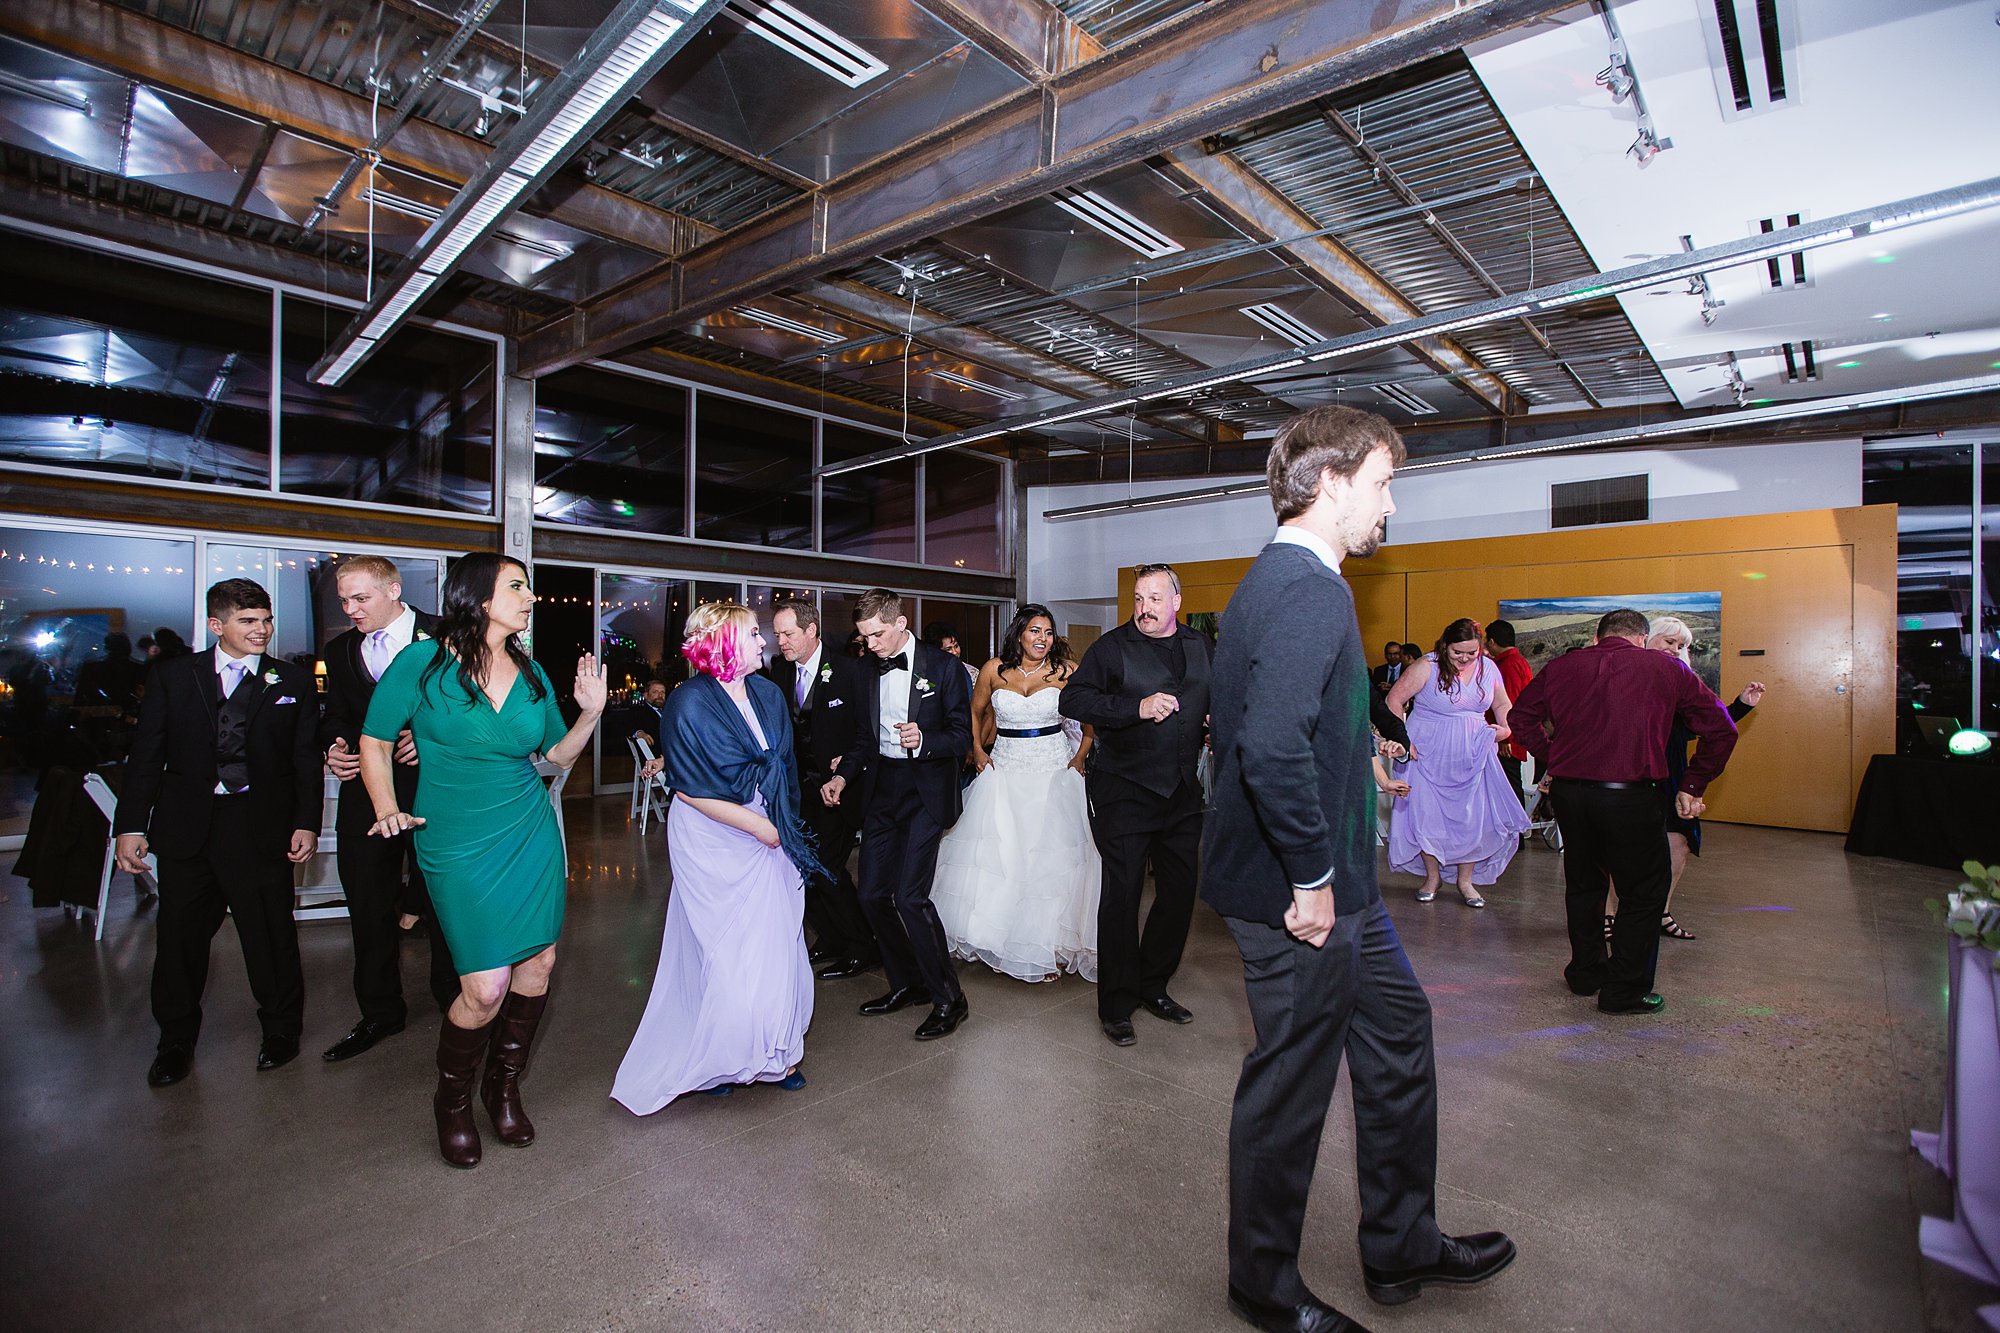 DJ leading the wedding guests in a line dance during the wedding reception at the Rio Salado Audubon center by Phoenix wedding photographer PMA Photography.